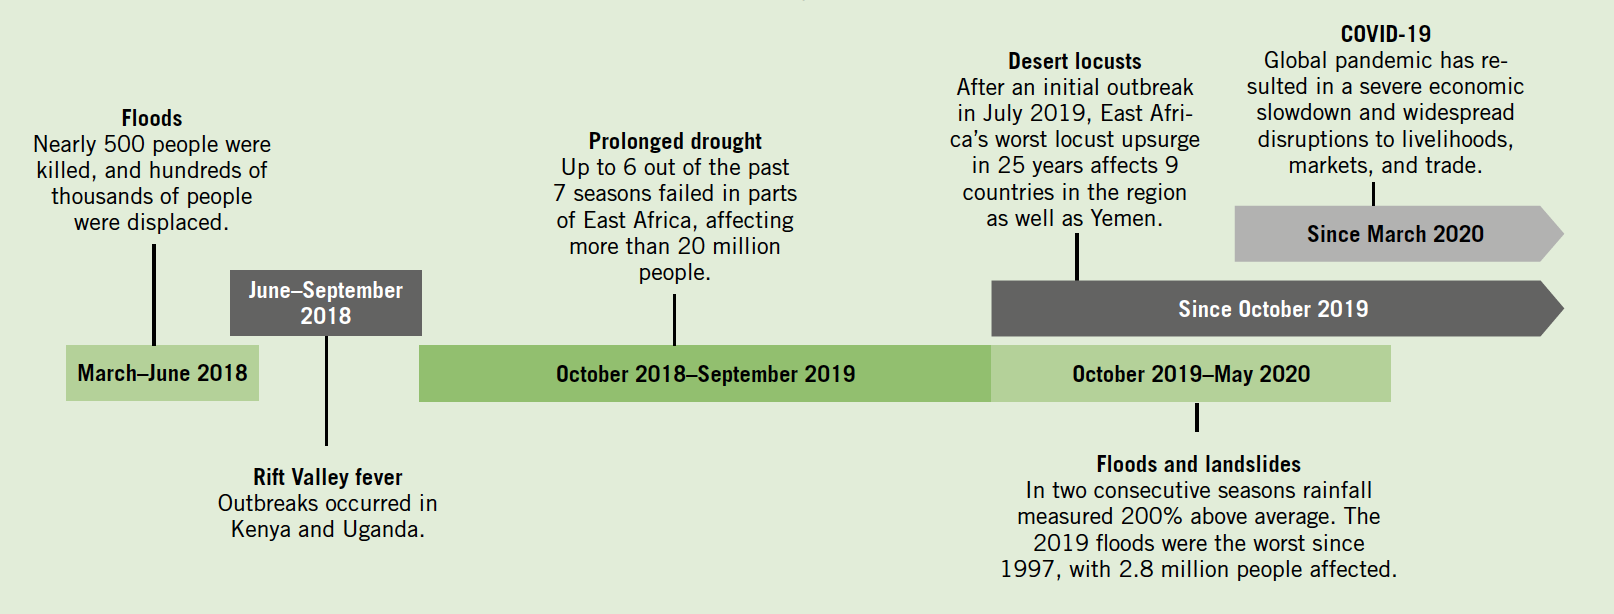 Timeline of Natural Hazards in the Greater Horn of Africa, 2018-2020